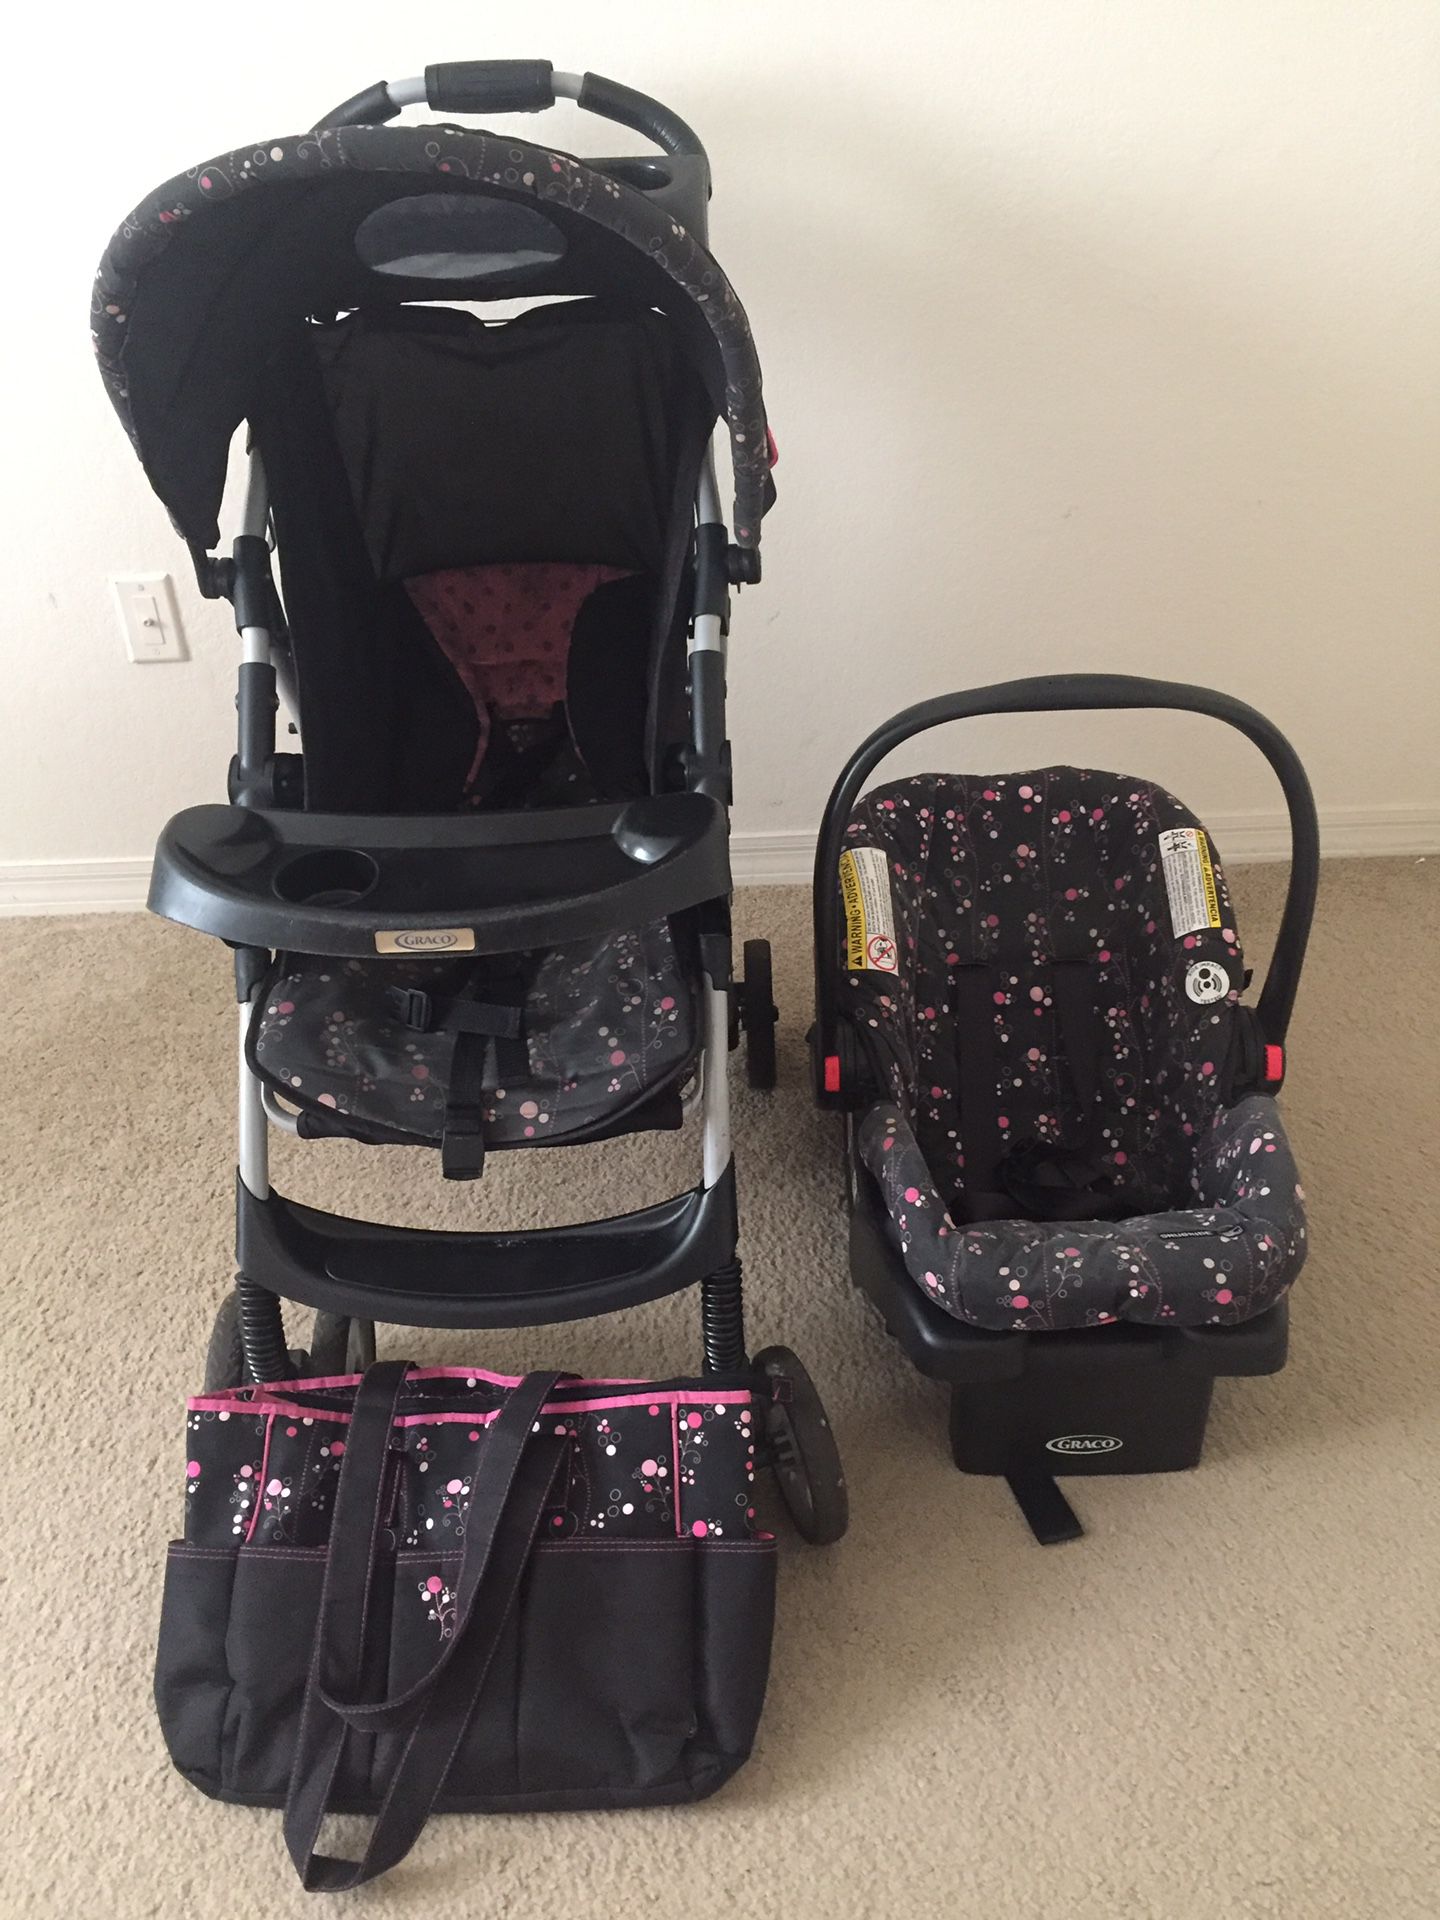 Graco travel system with diaper bag(stroller, car seat and diaper bag)